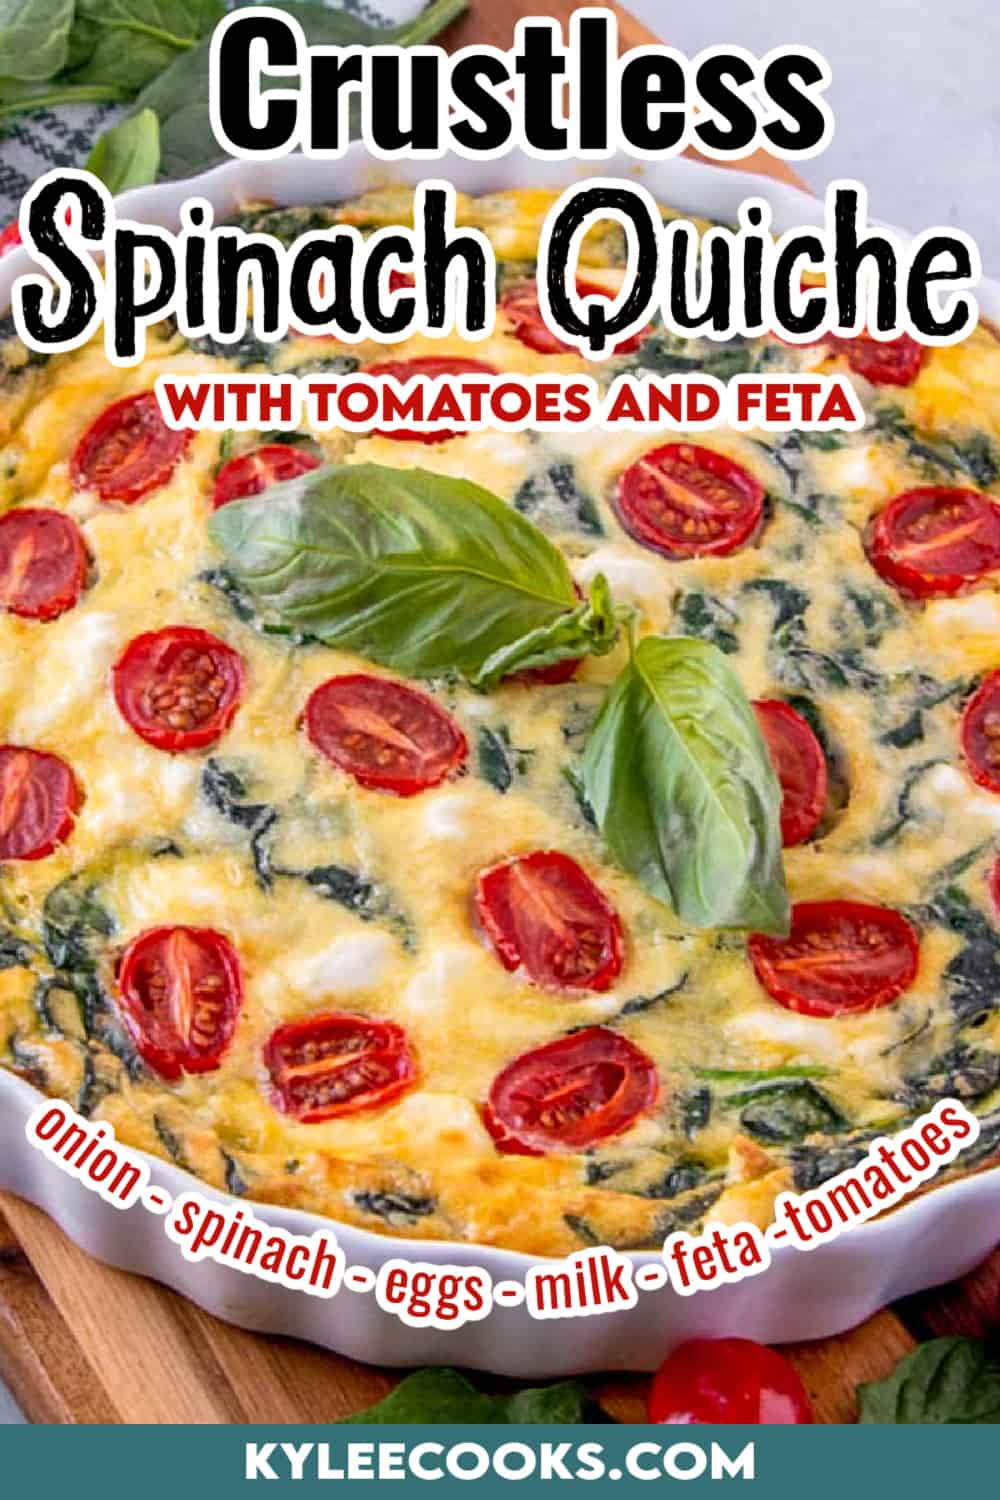 crustless spinach quiche in a tart pan with recipe name overlaid in text.